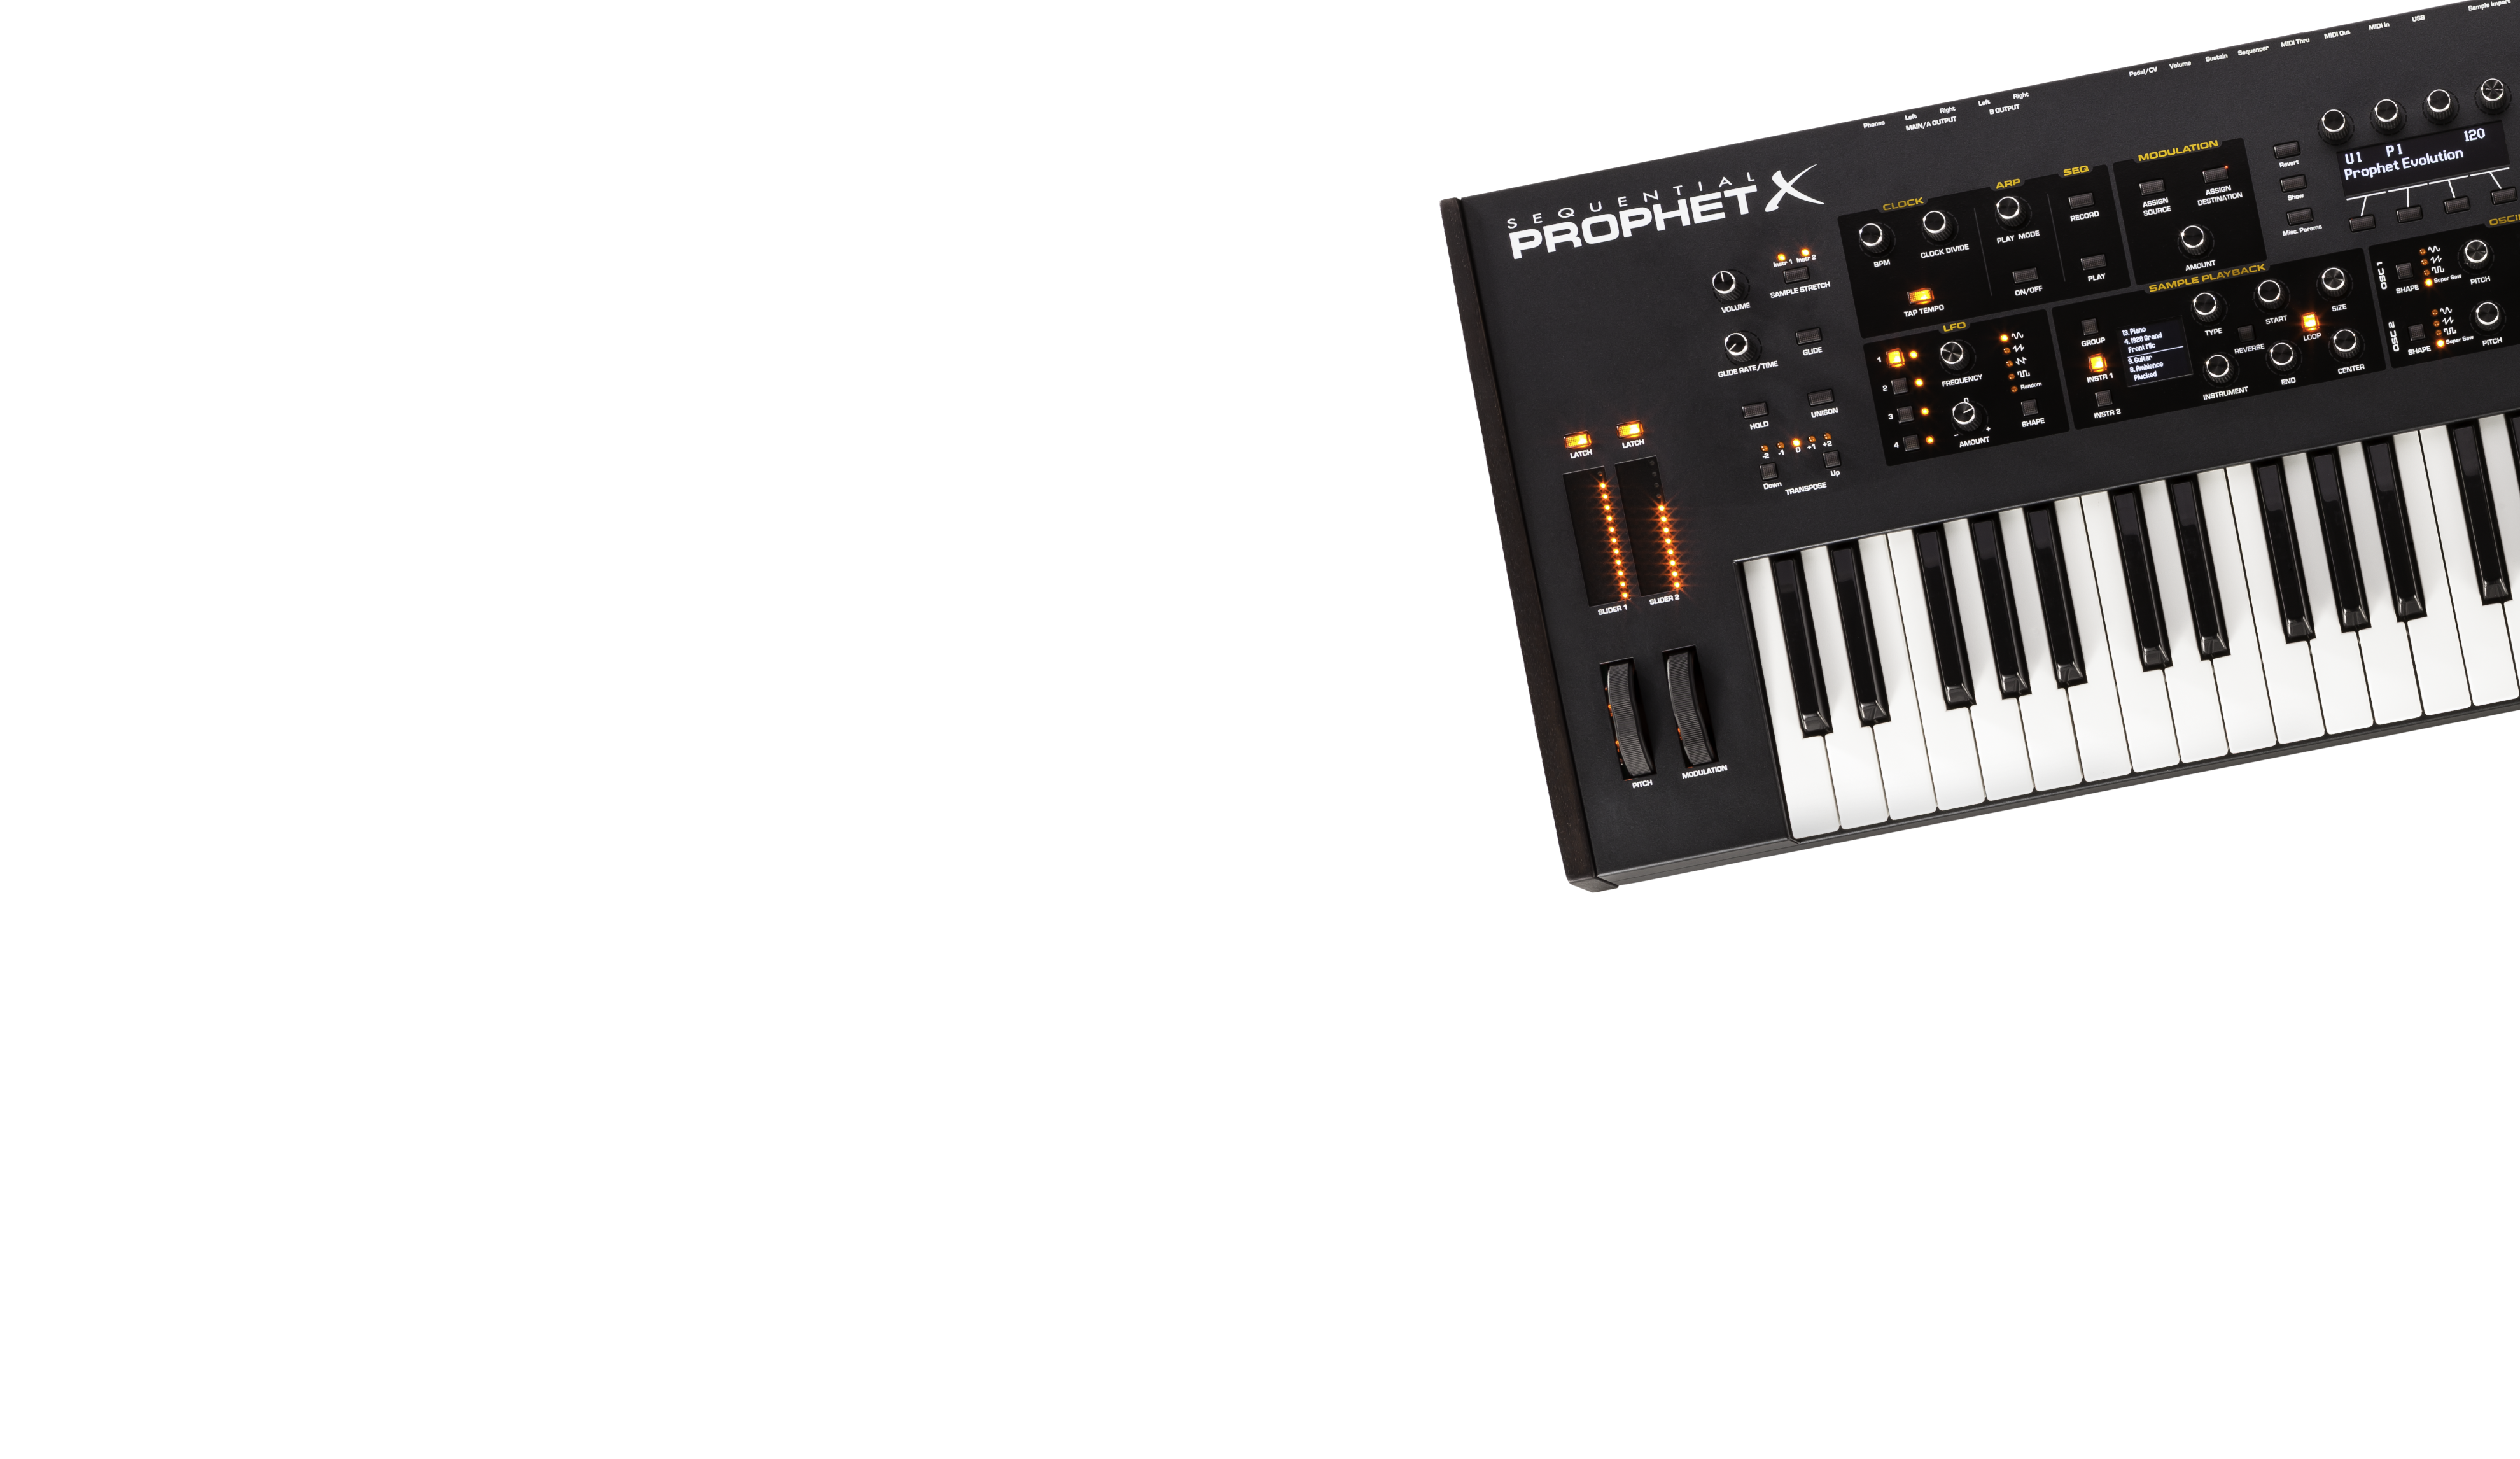 ALSO CHECK OUT THE LAST PROPHET 5 ADD-ON